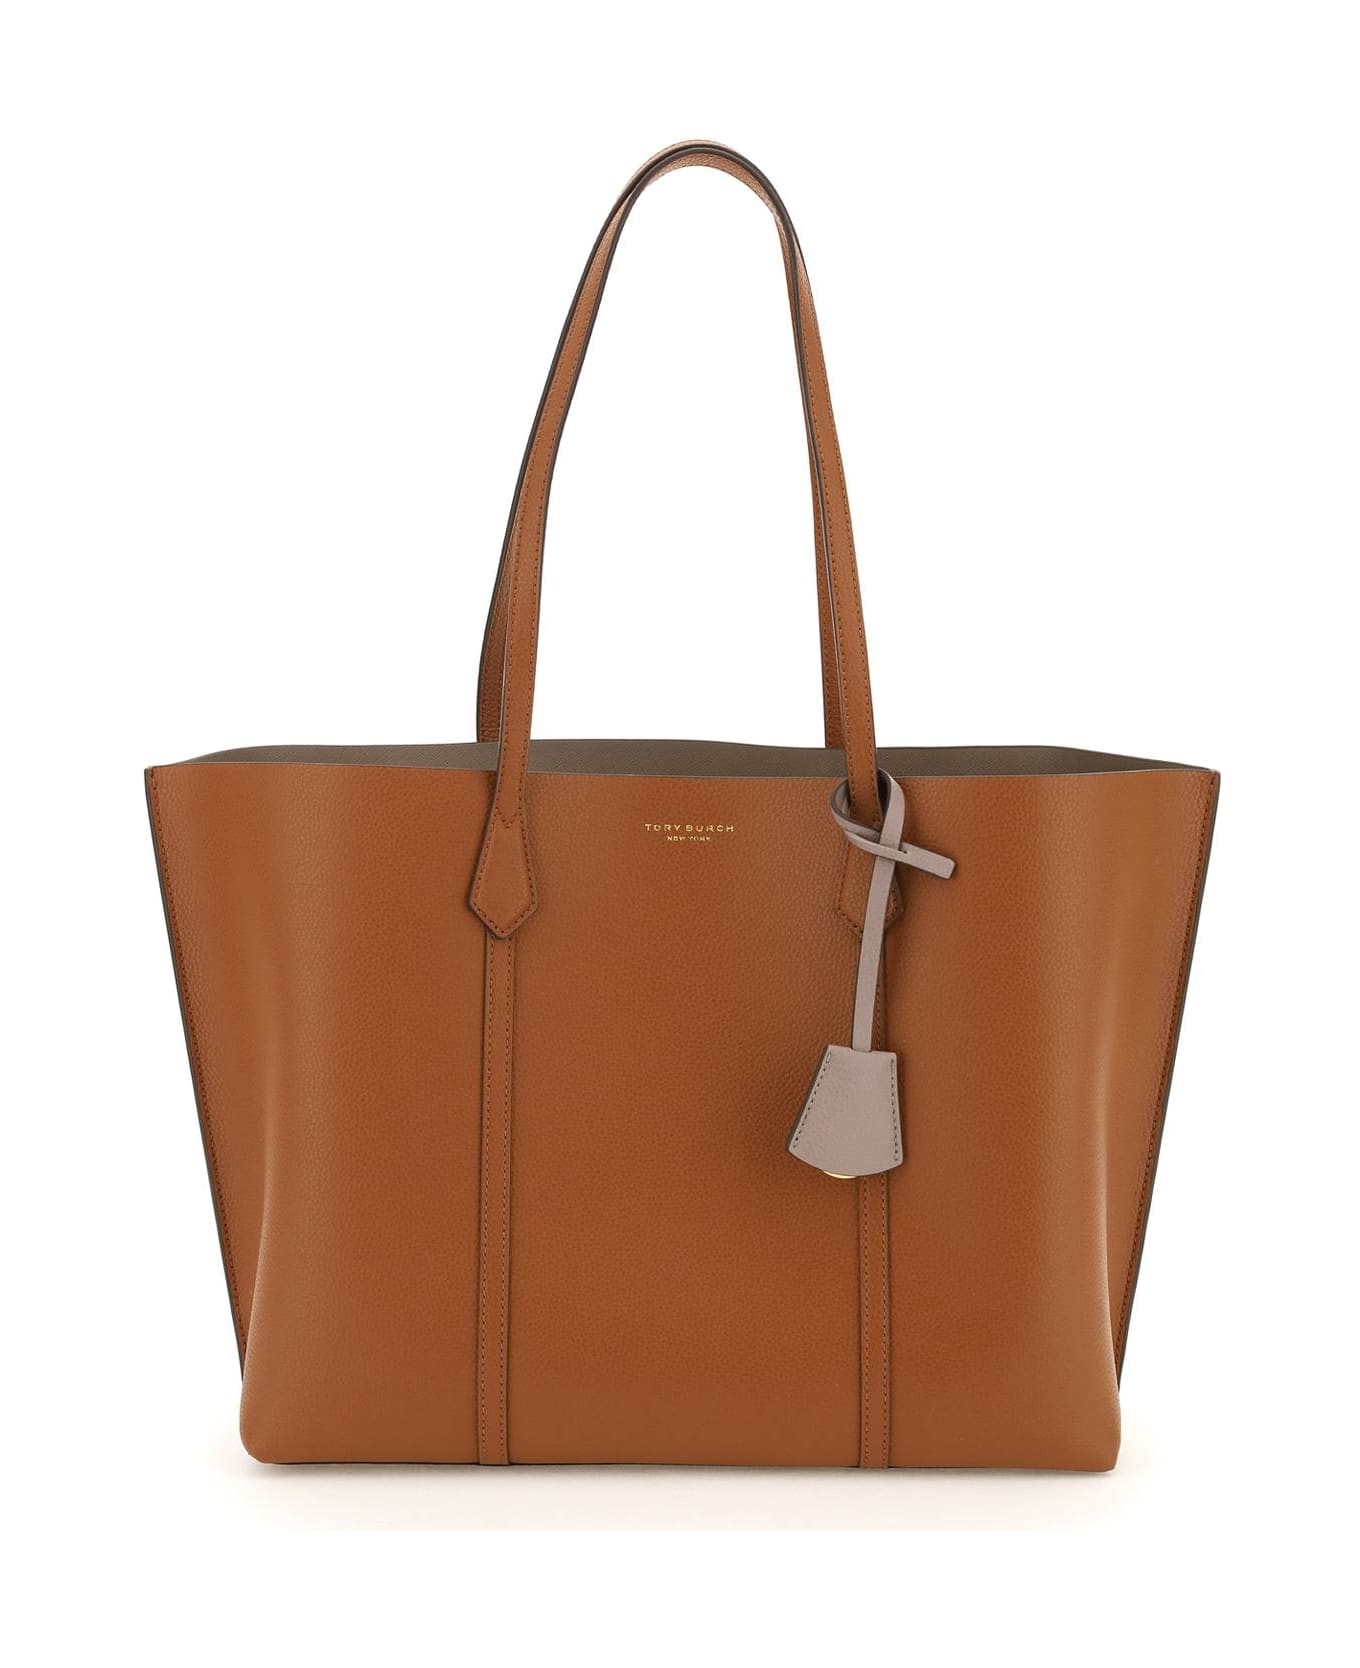 Tory Burch 'perry' Medium Tote - Brown トートバッグ